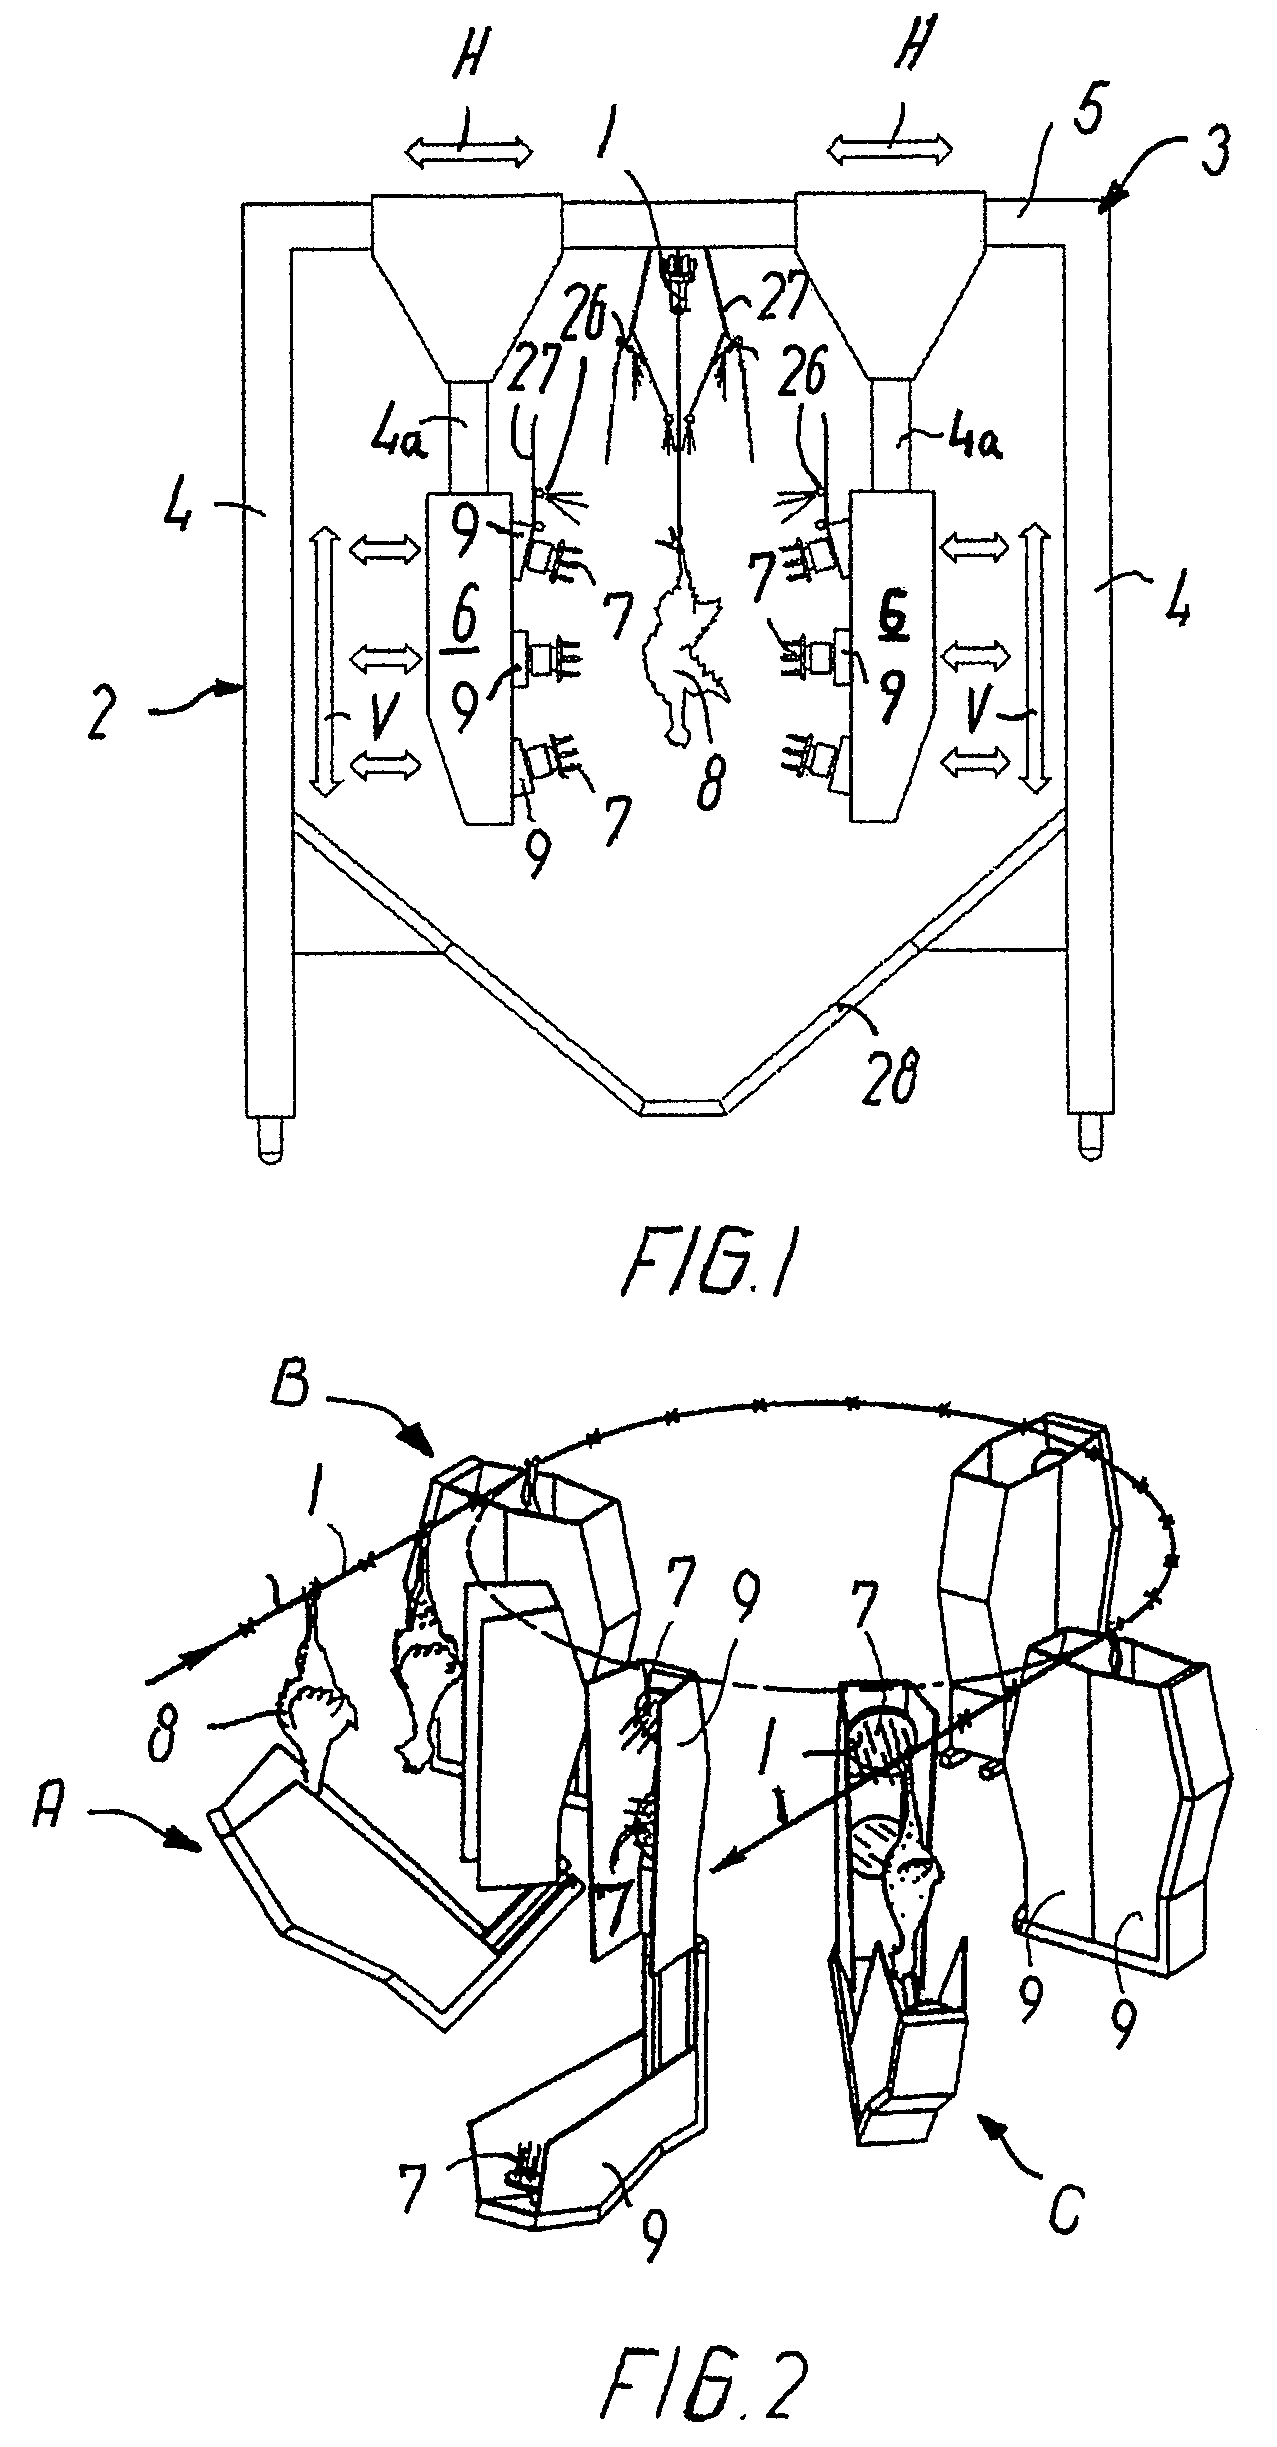 Poultry defeathering apparatus